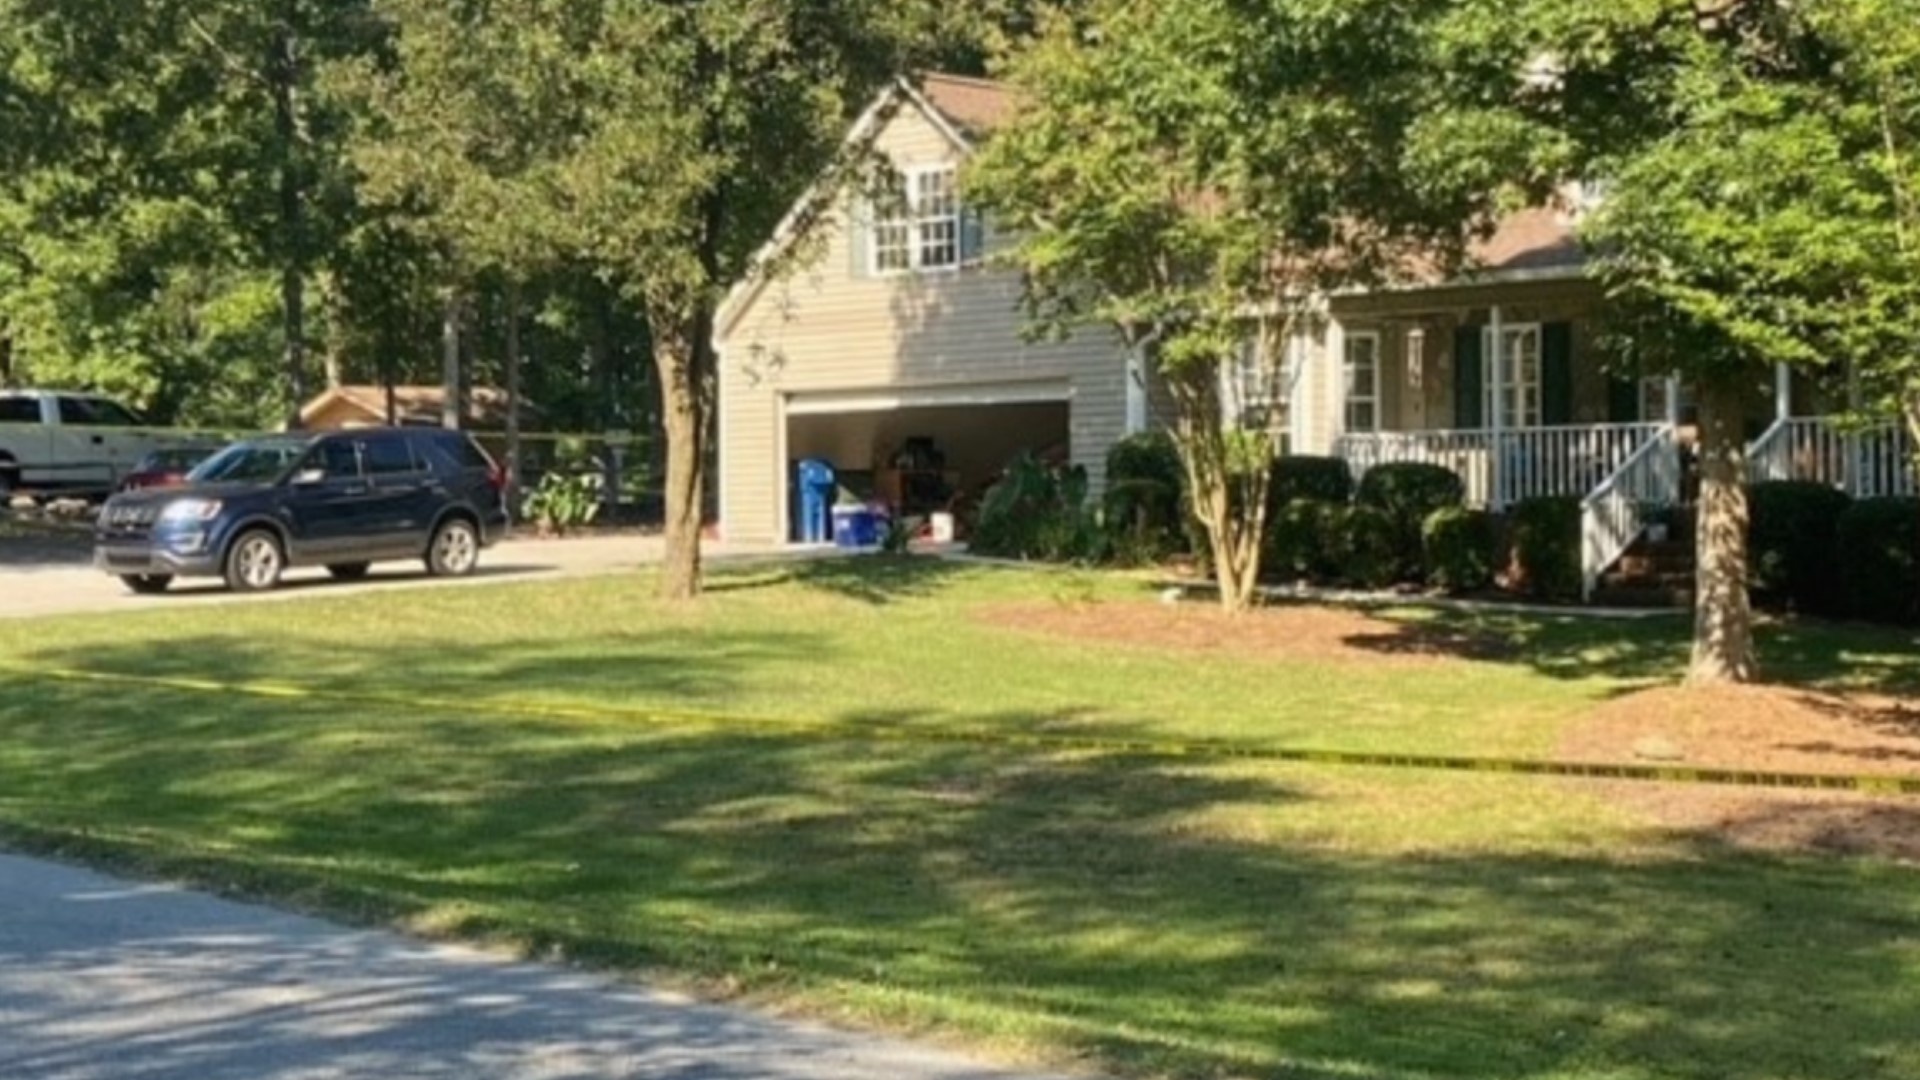 Police said they found 34-year-old Joshua Richard Rose dead in the backyard area of a home on Springwood Lane in Archdale.